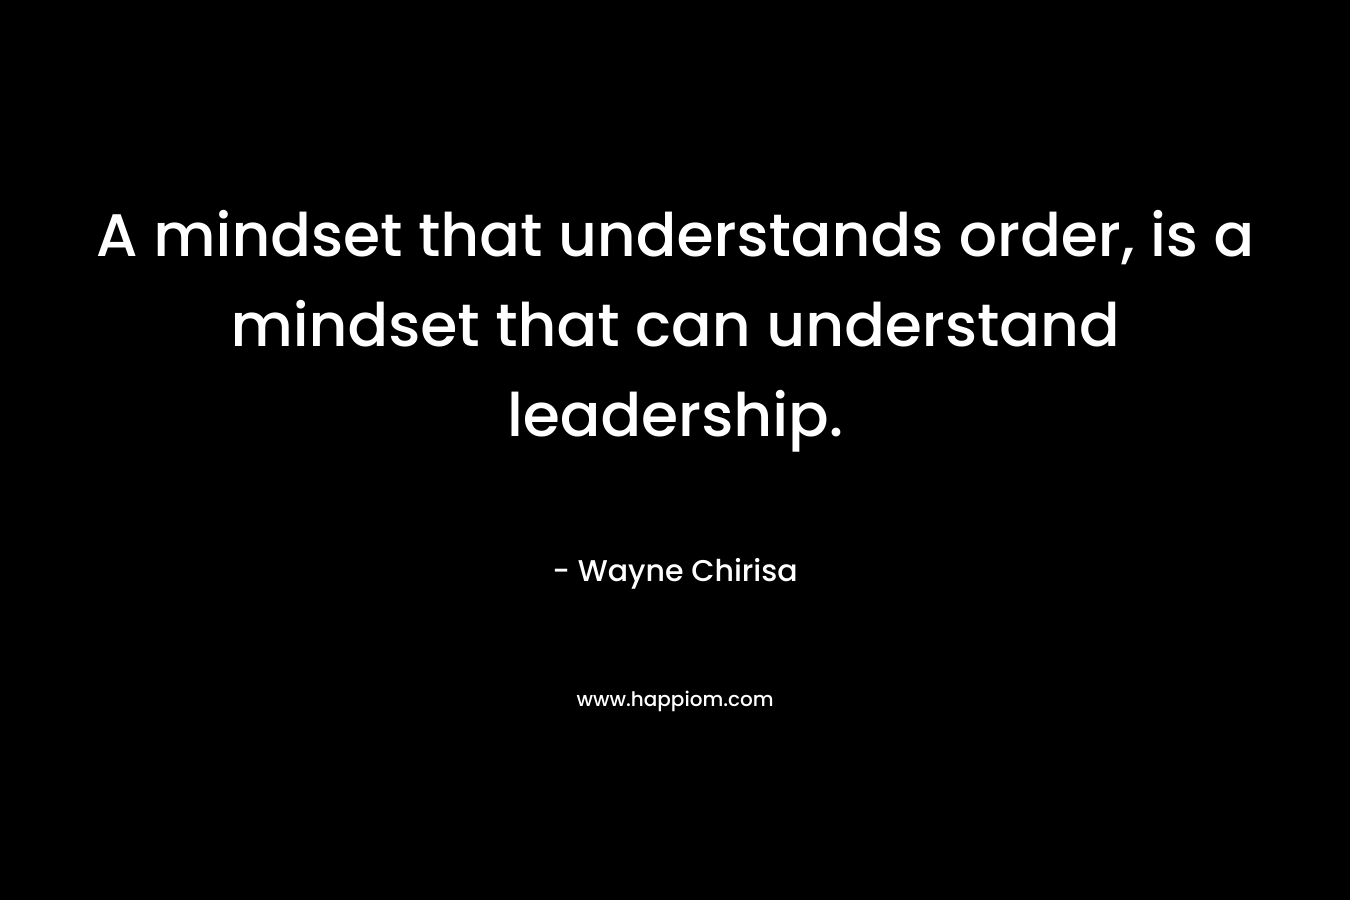 A mindset that understands order, is a mindset that can understand leadership.